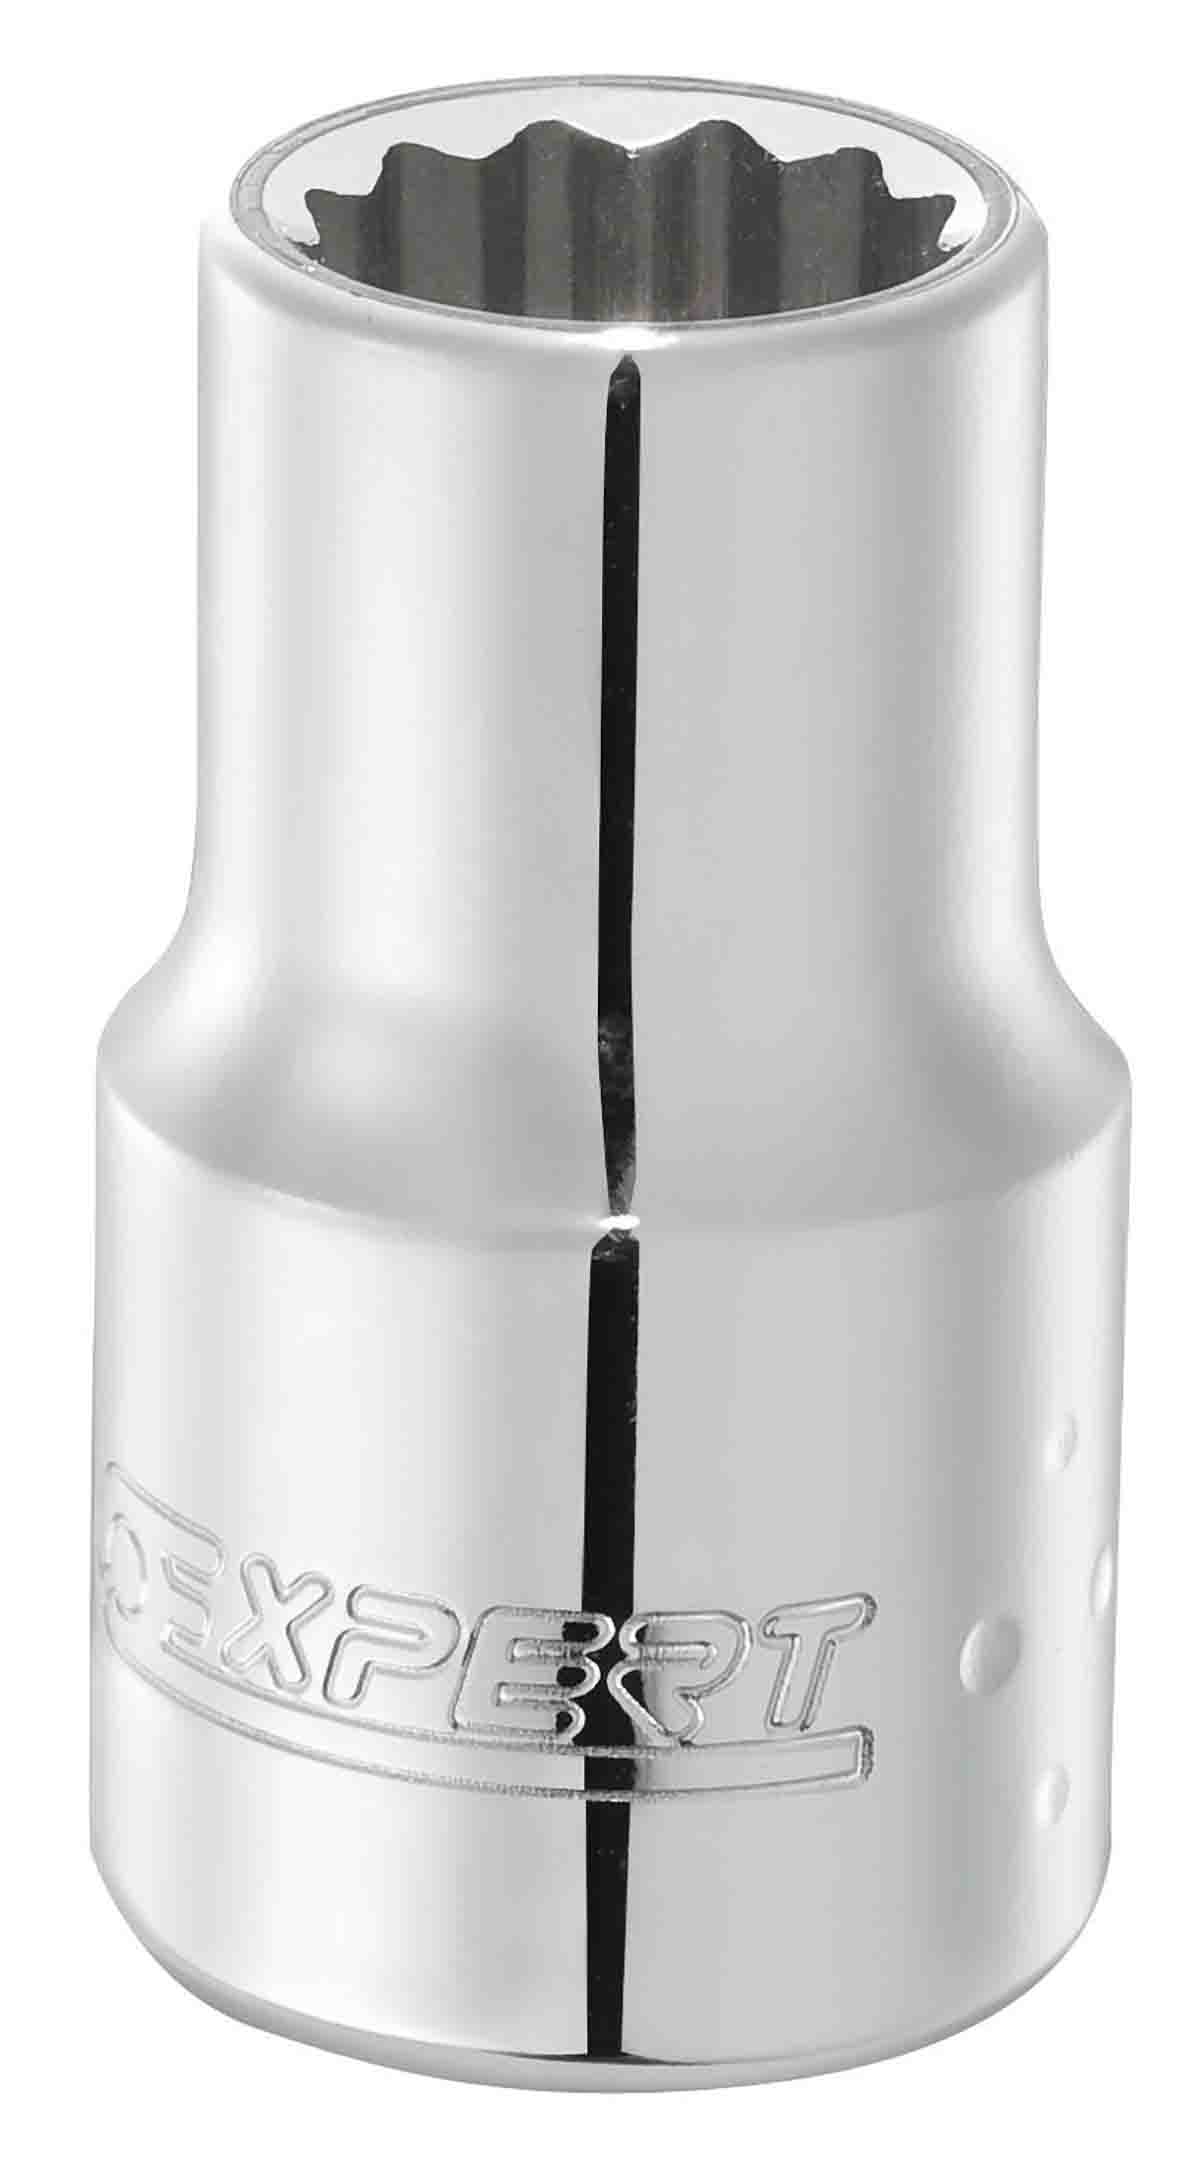 Expert by Facom 10mm Bi-Hex Socket With 1/2 in Drive , Length 38 mm